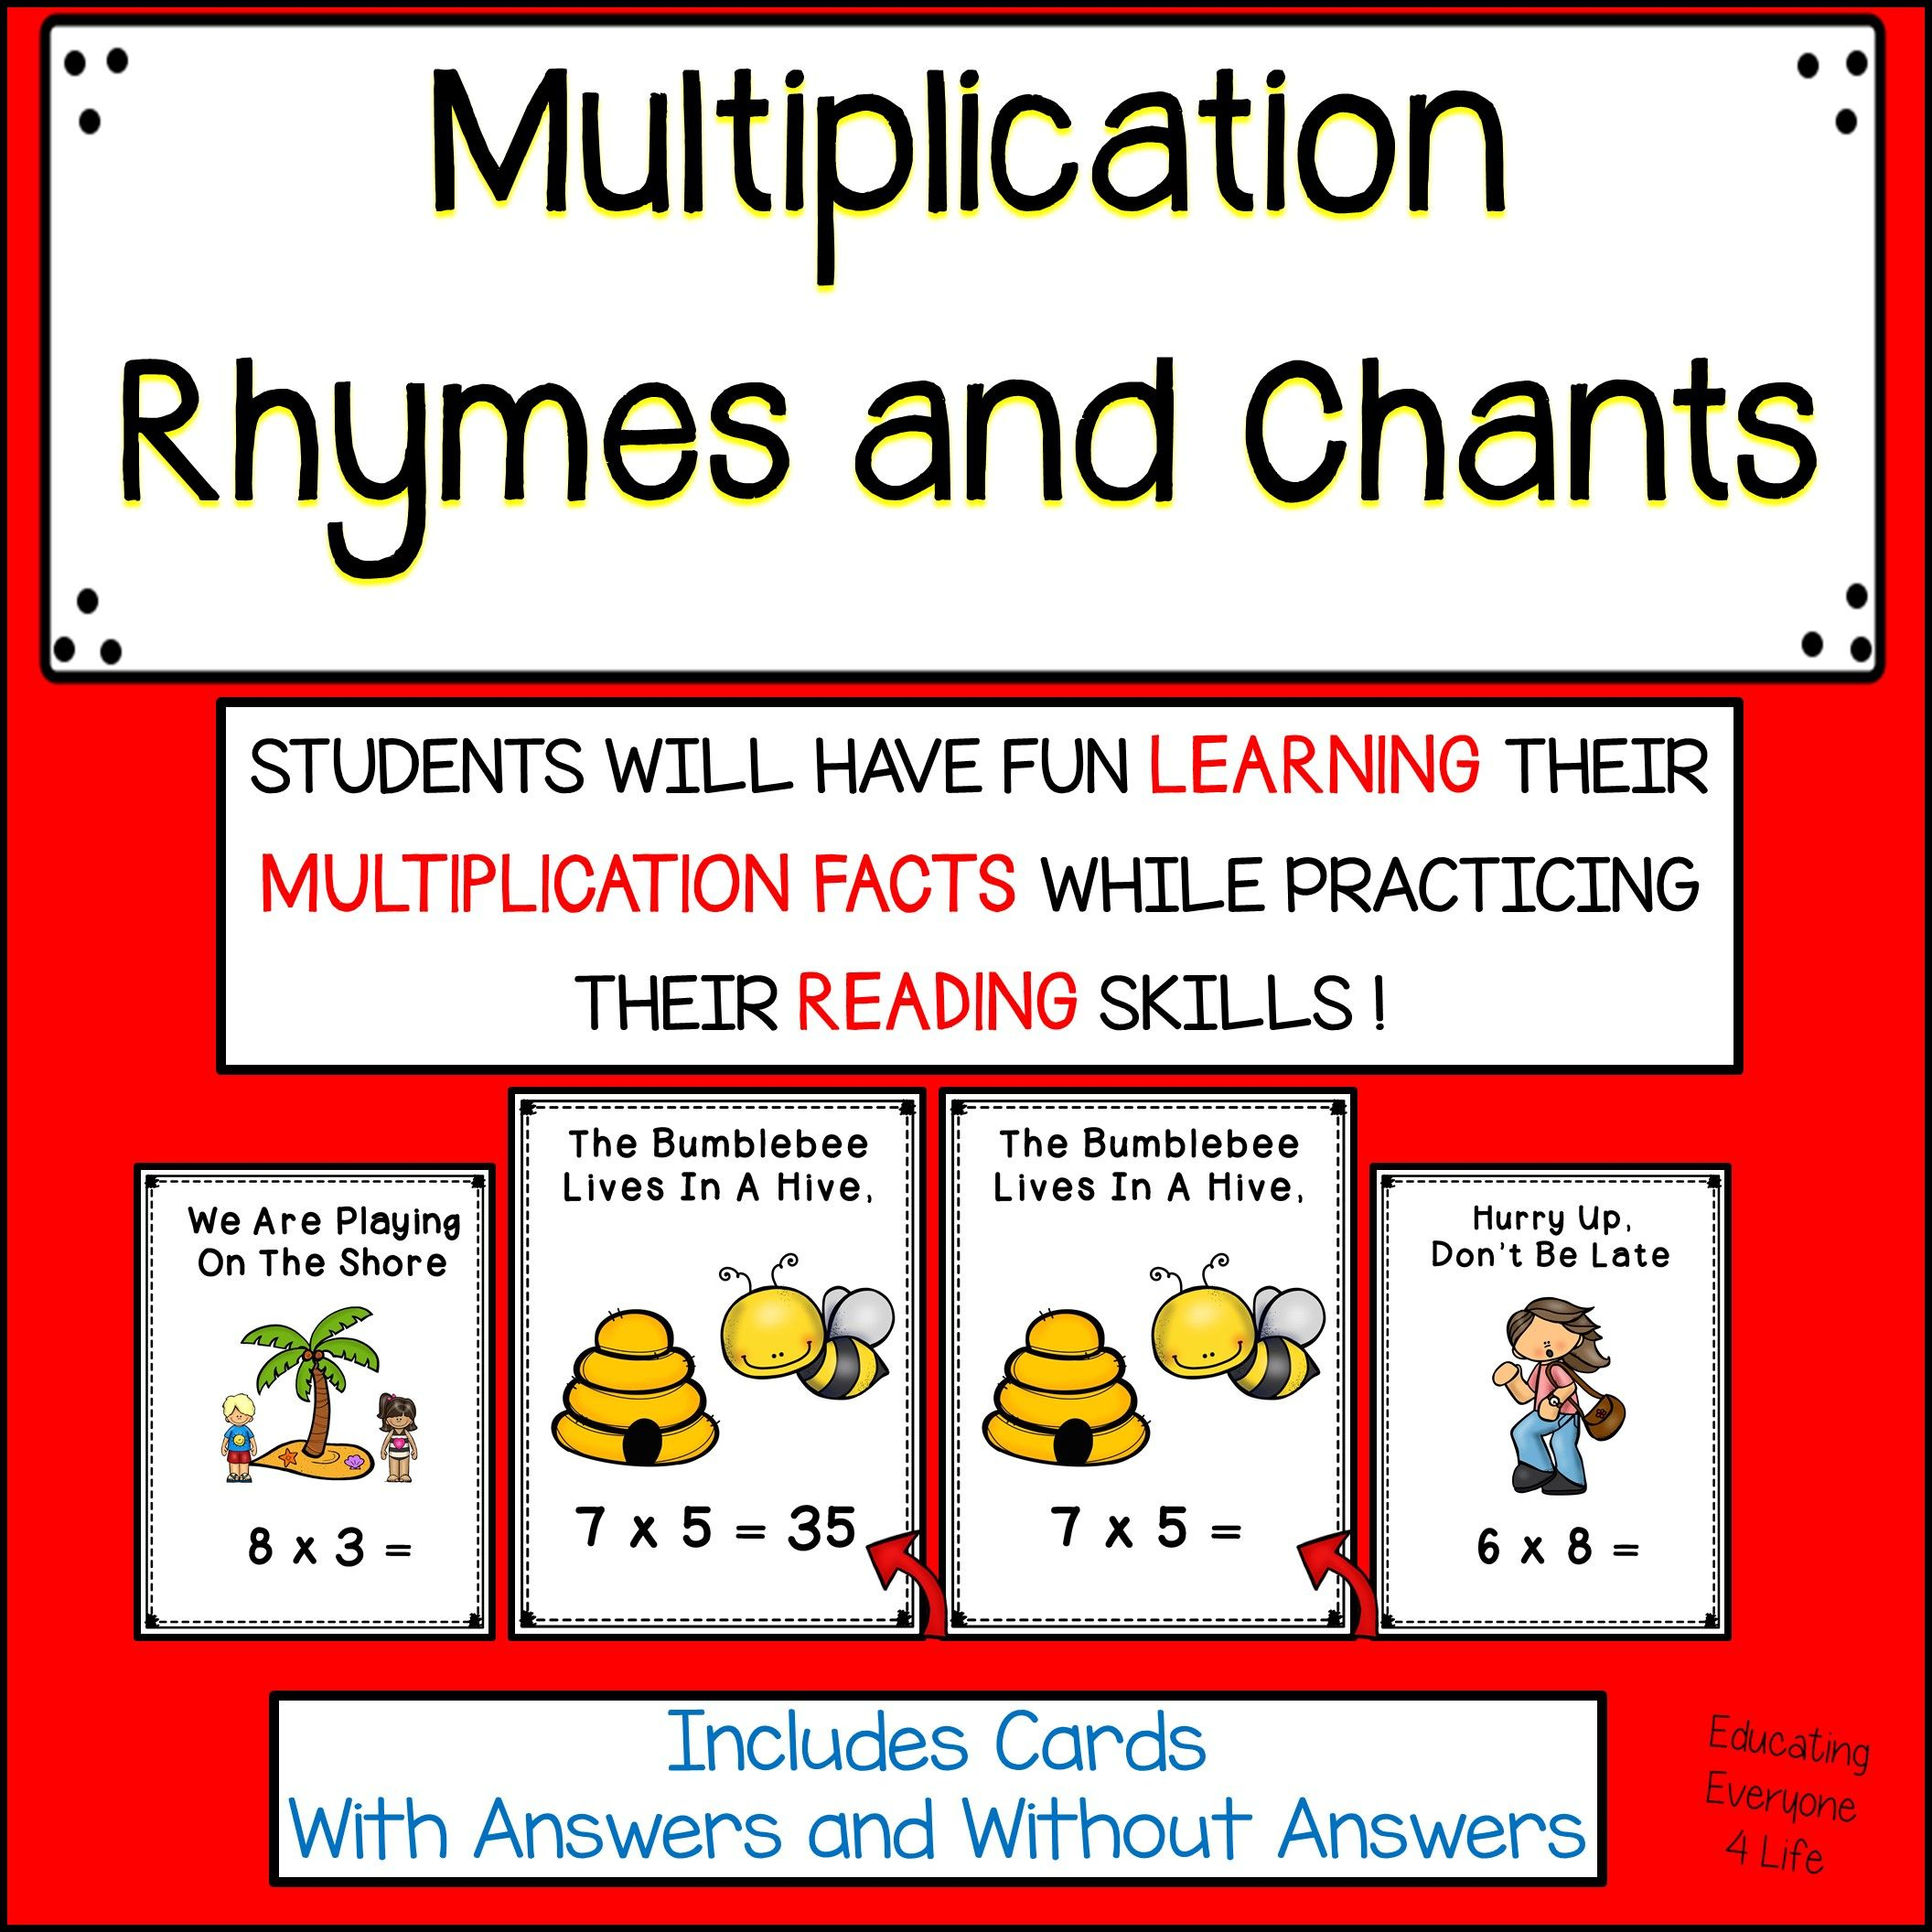 Multiplication Rhymes And Chants | Teaching Multiplication with Printable Multiplication Rhymes